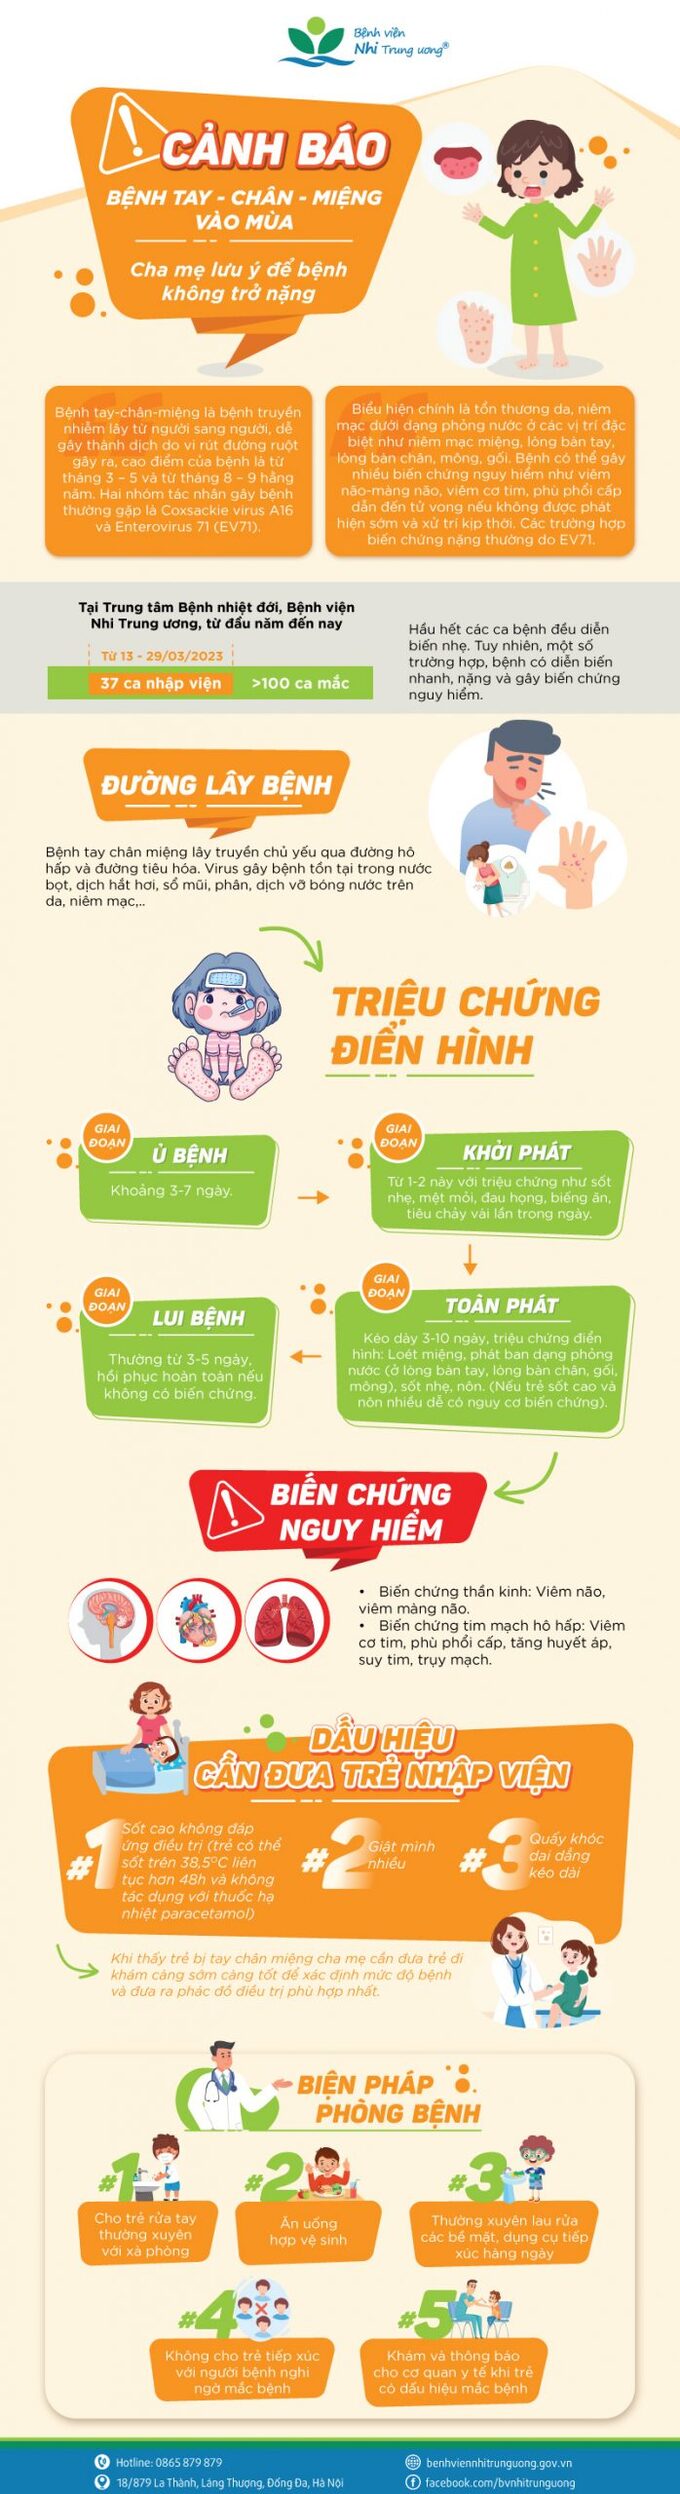 infographic-tay-chan-mieng11-scaled